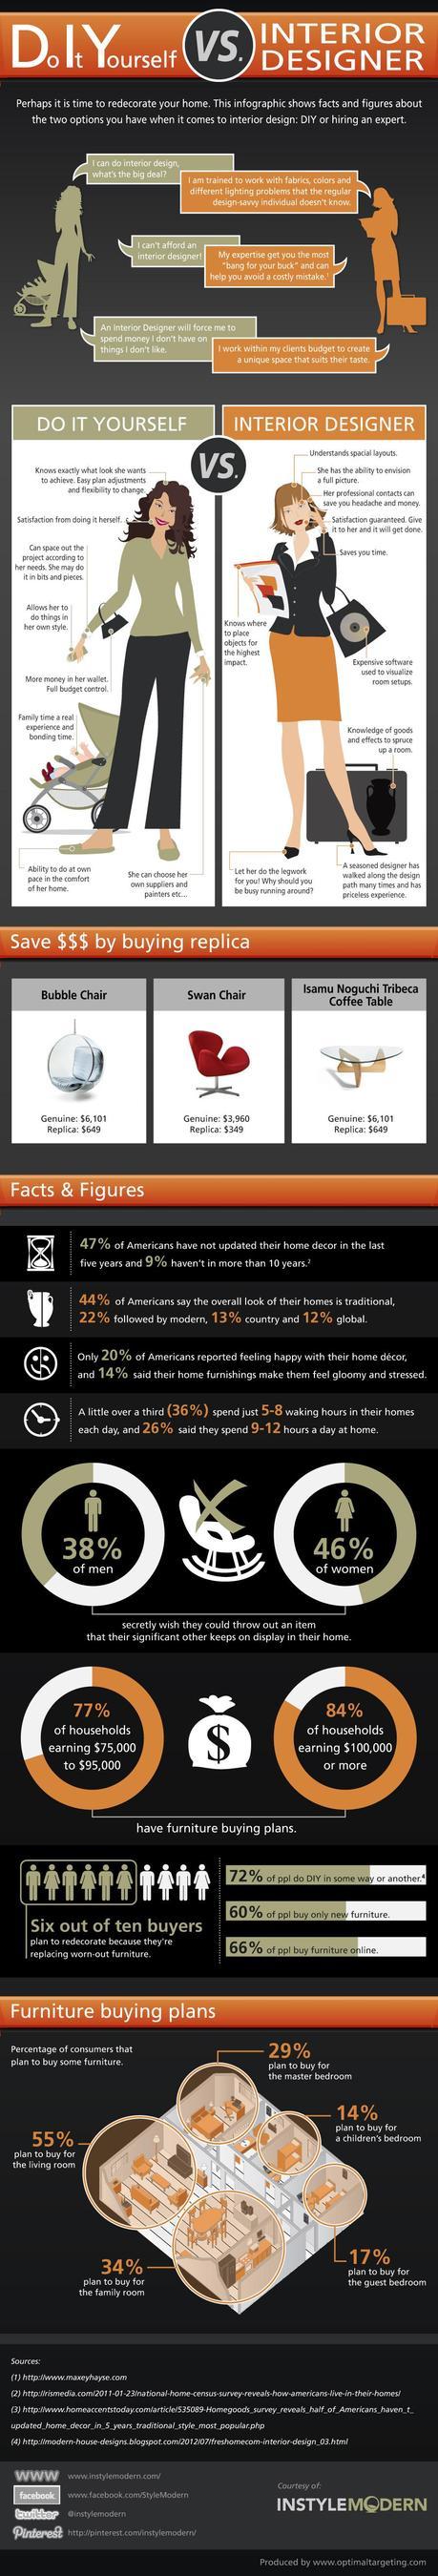 Infographic on Interior Design For Your Home